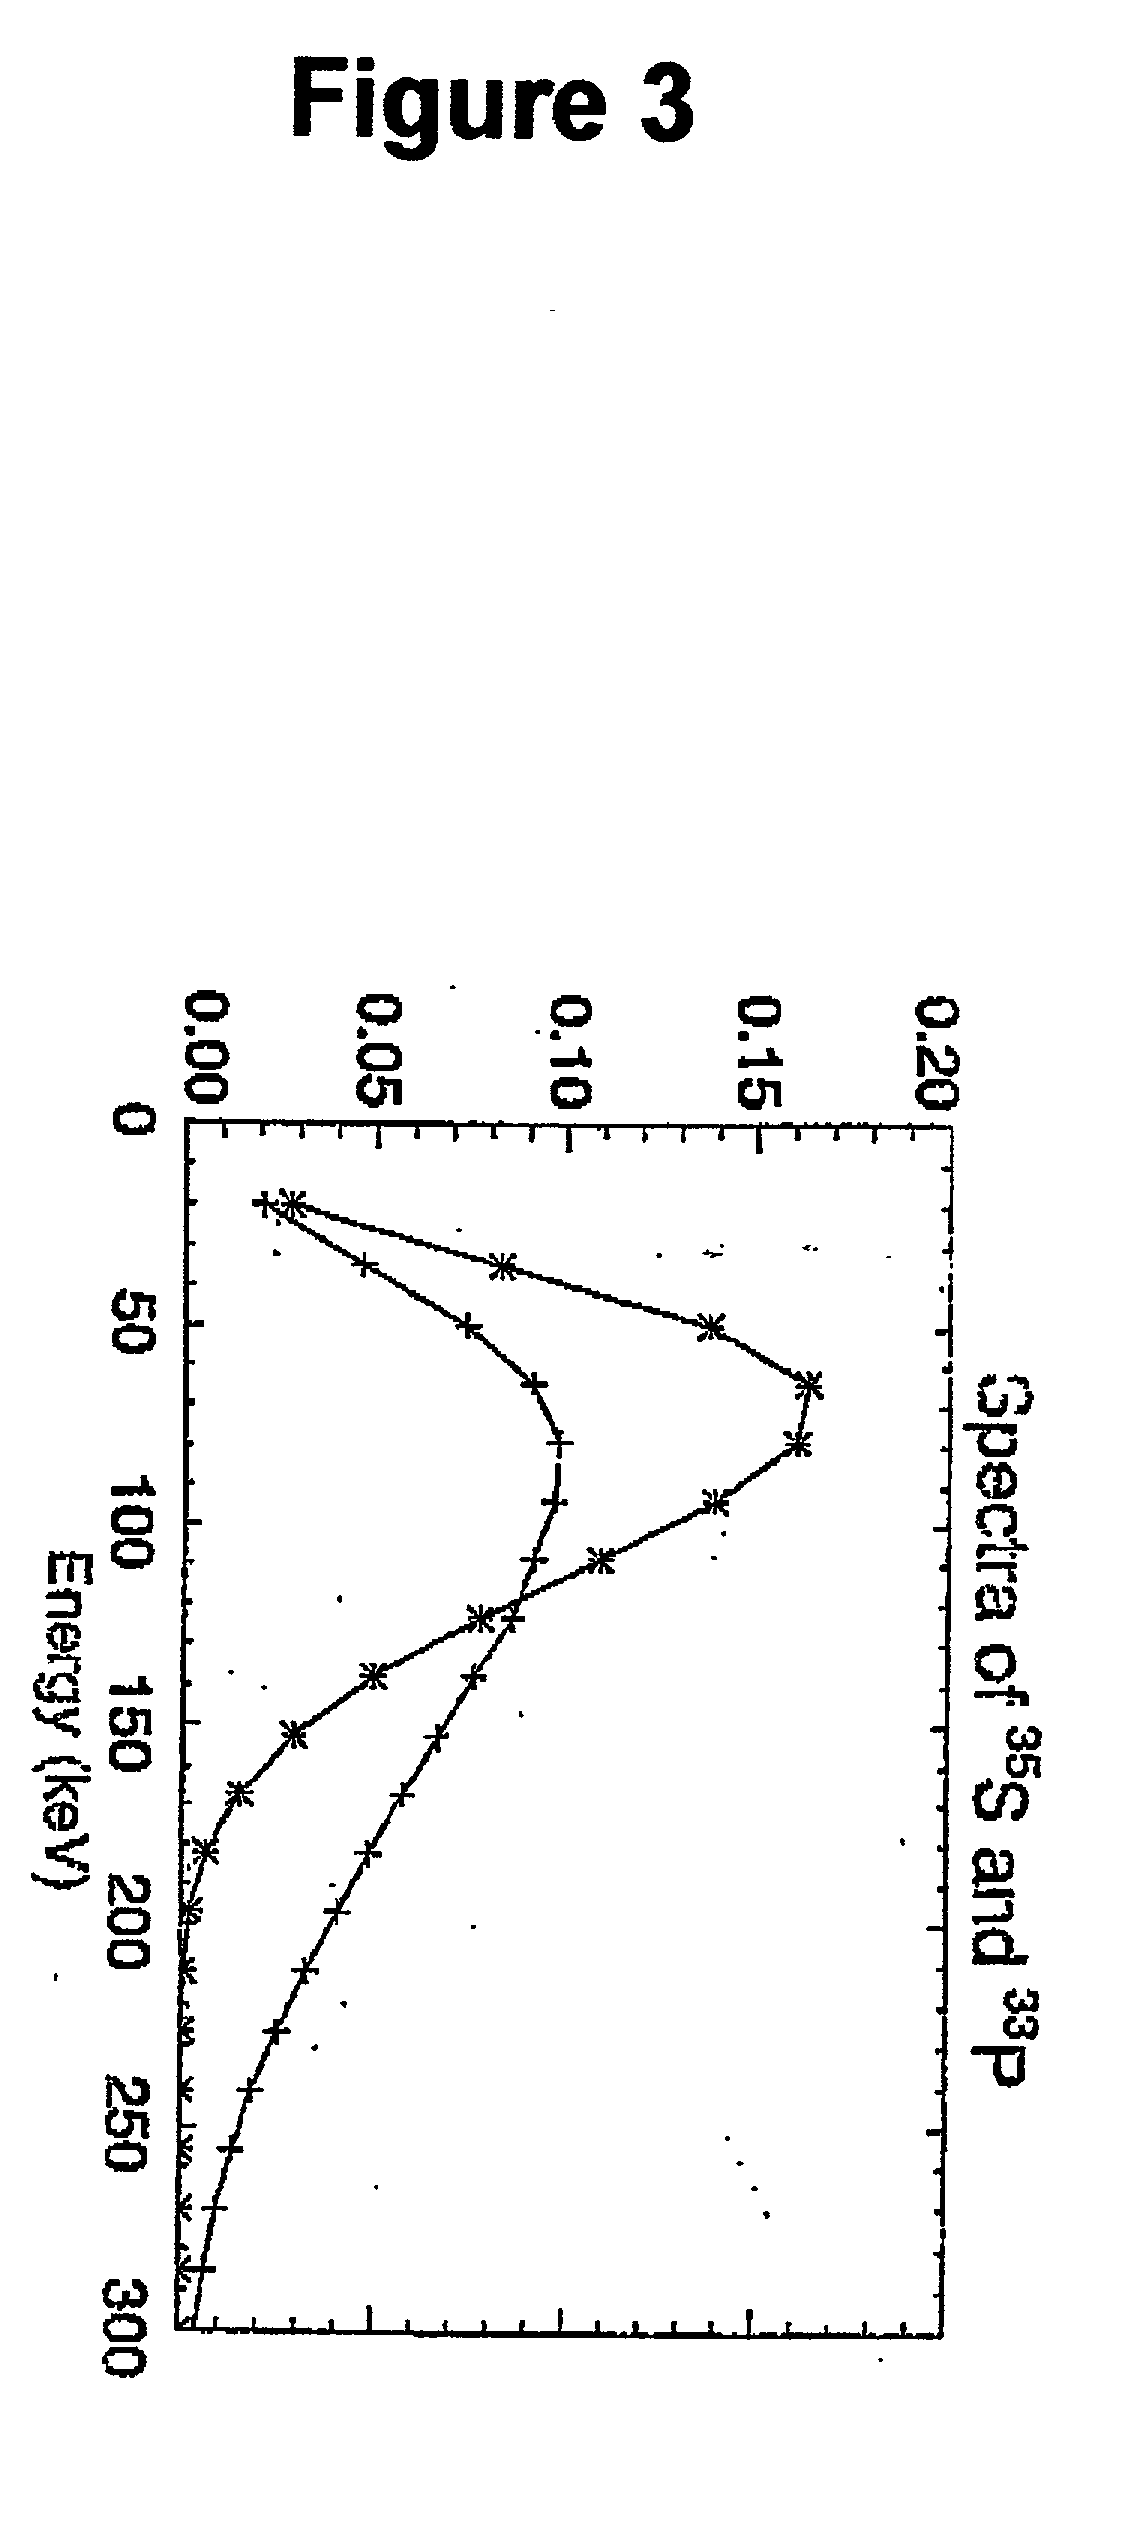 Method and apparatus for simultaneous quantification of different radionuclides in a large number of regions on the surface of a biological microarray or similar test objects